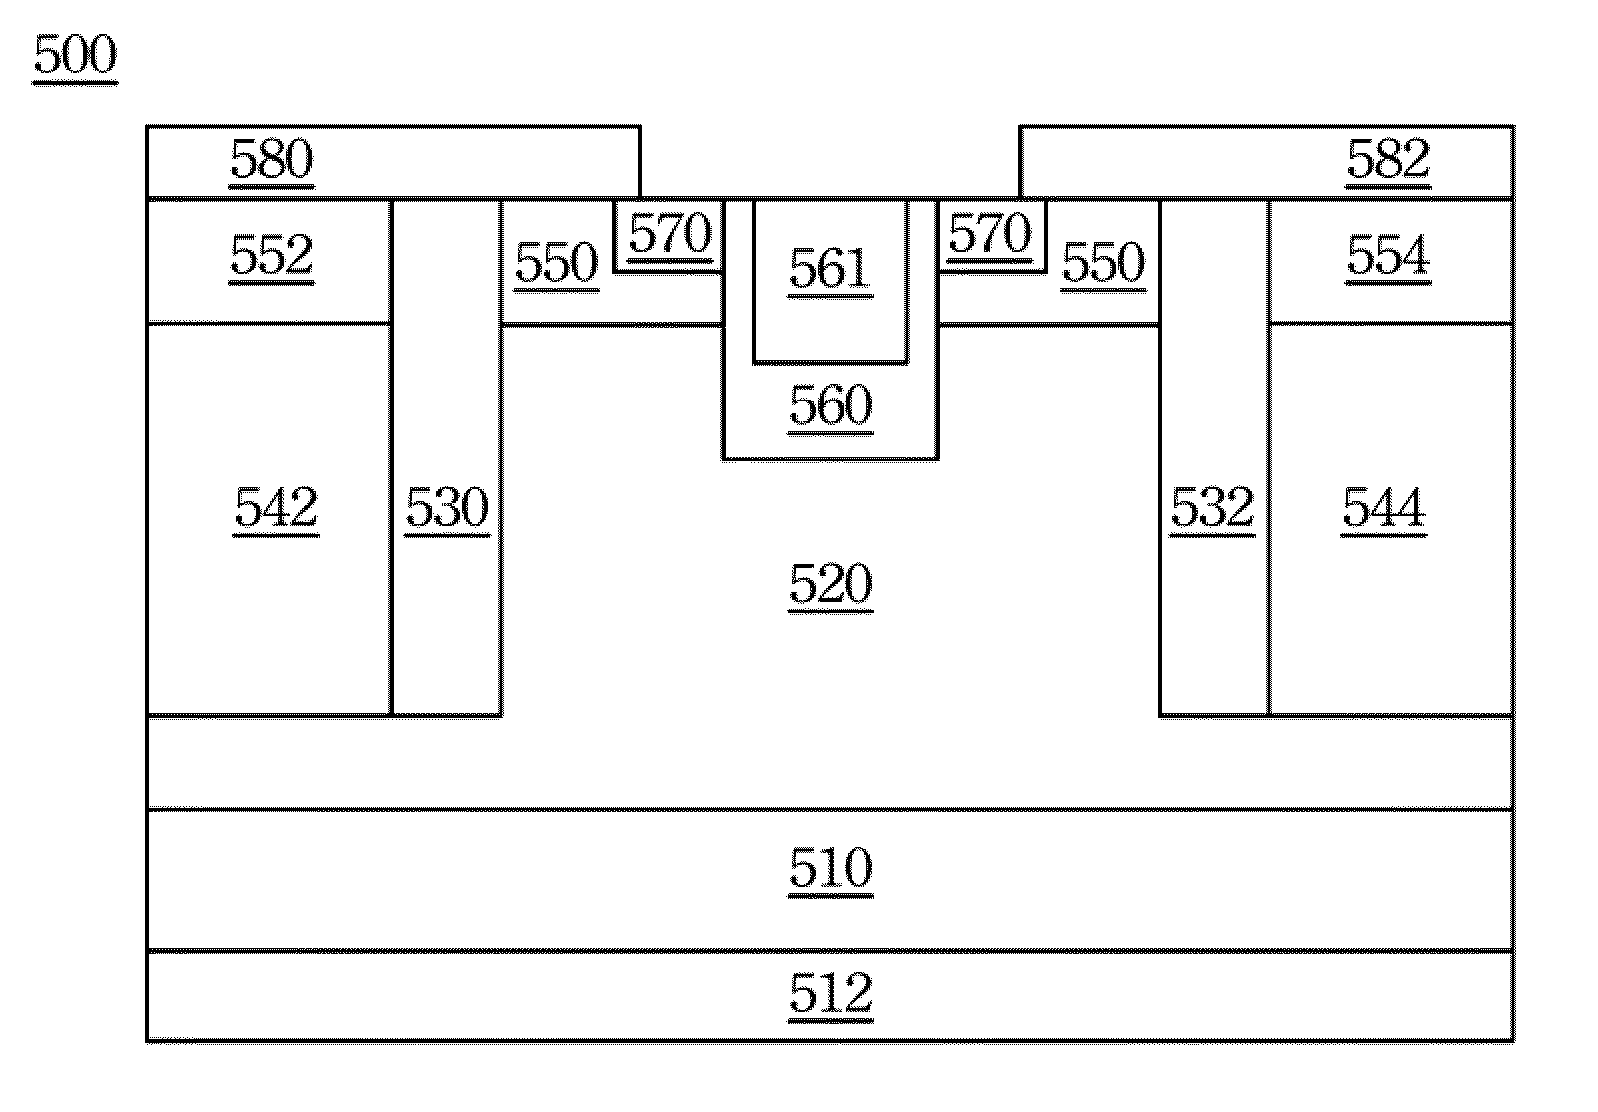 Super junction semiconductor device